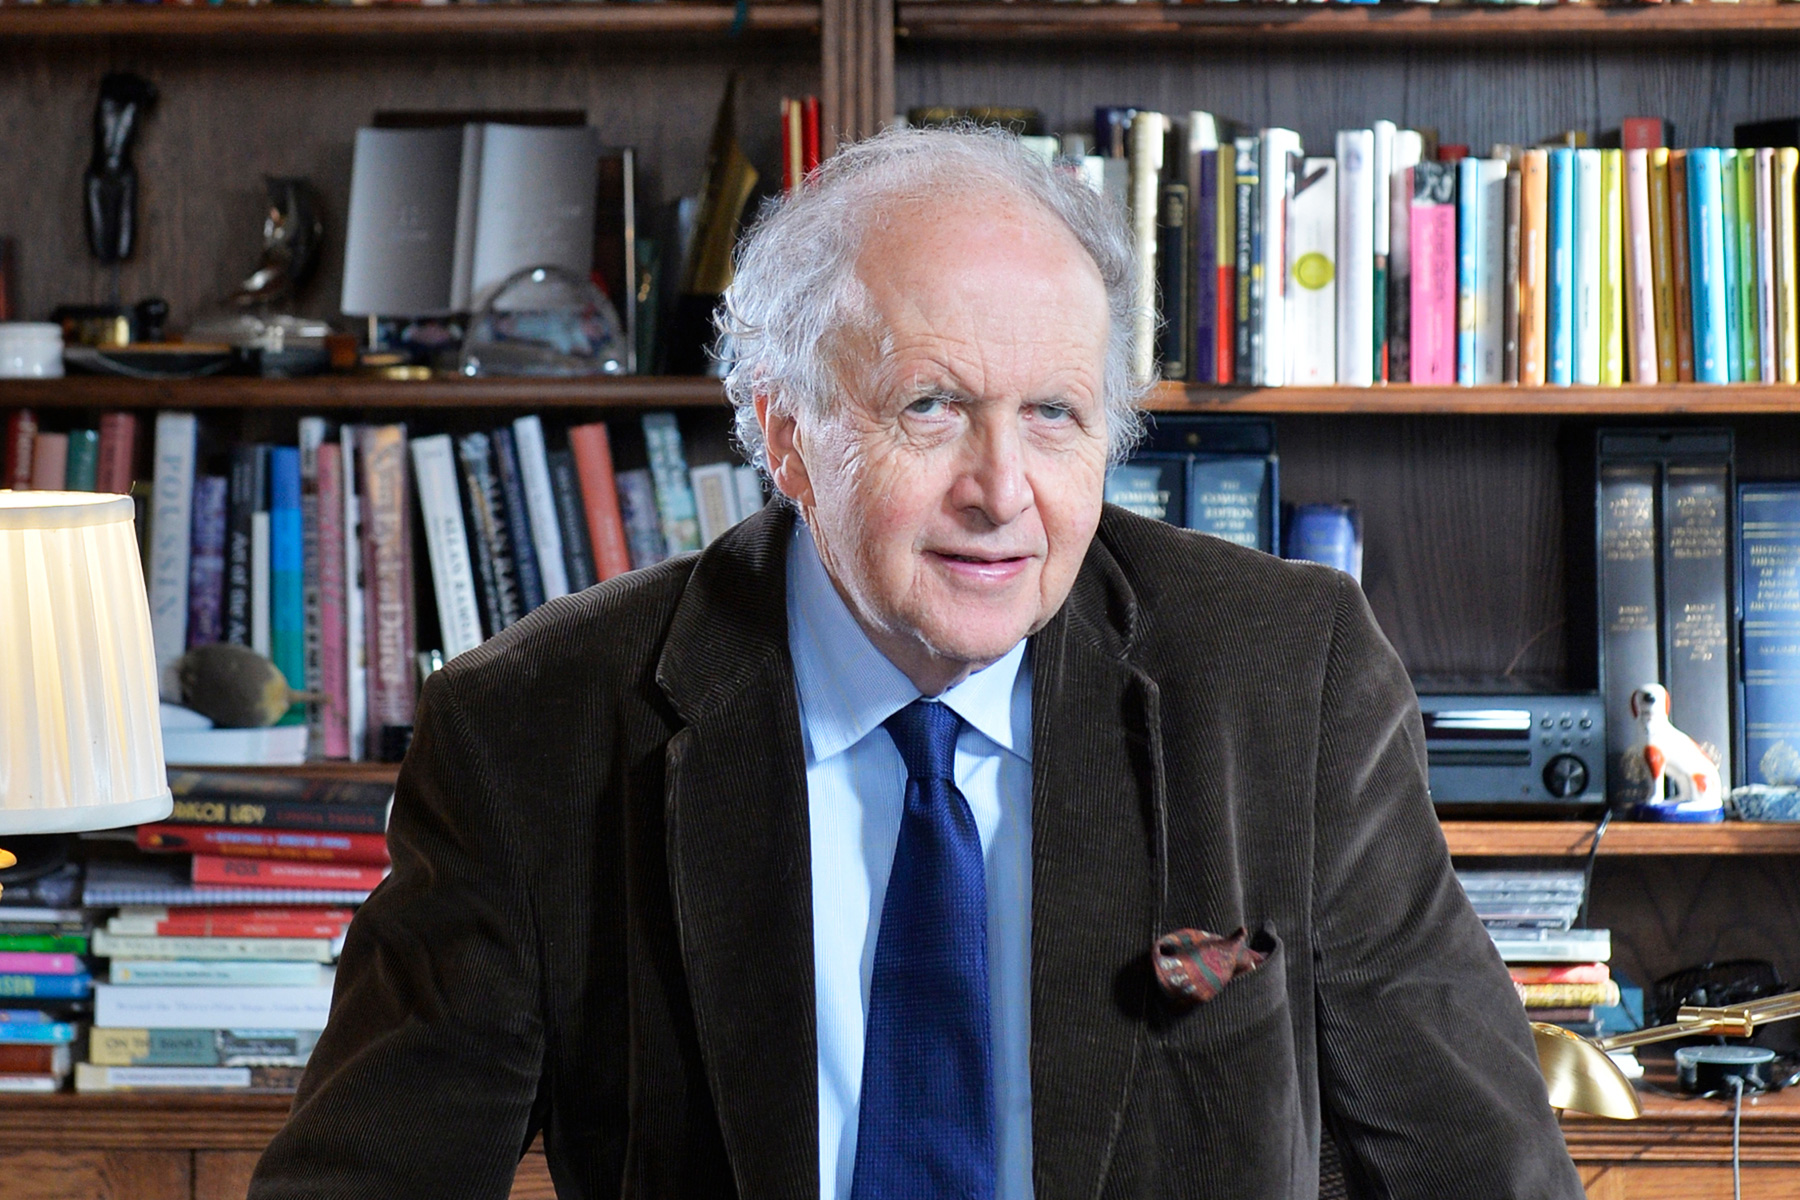 A photograph of Alexander McCall Smith in front of a bookshelf